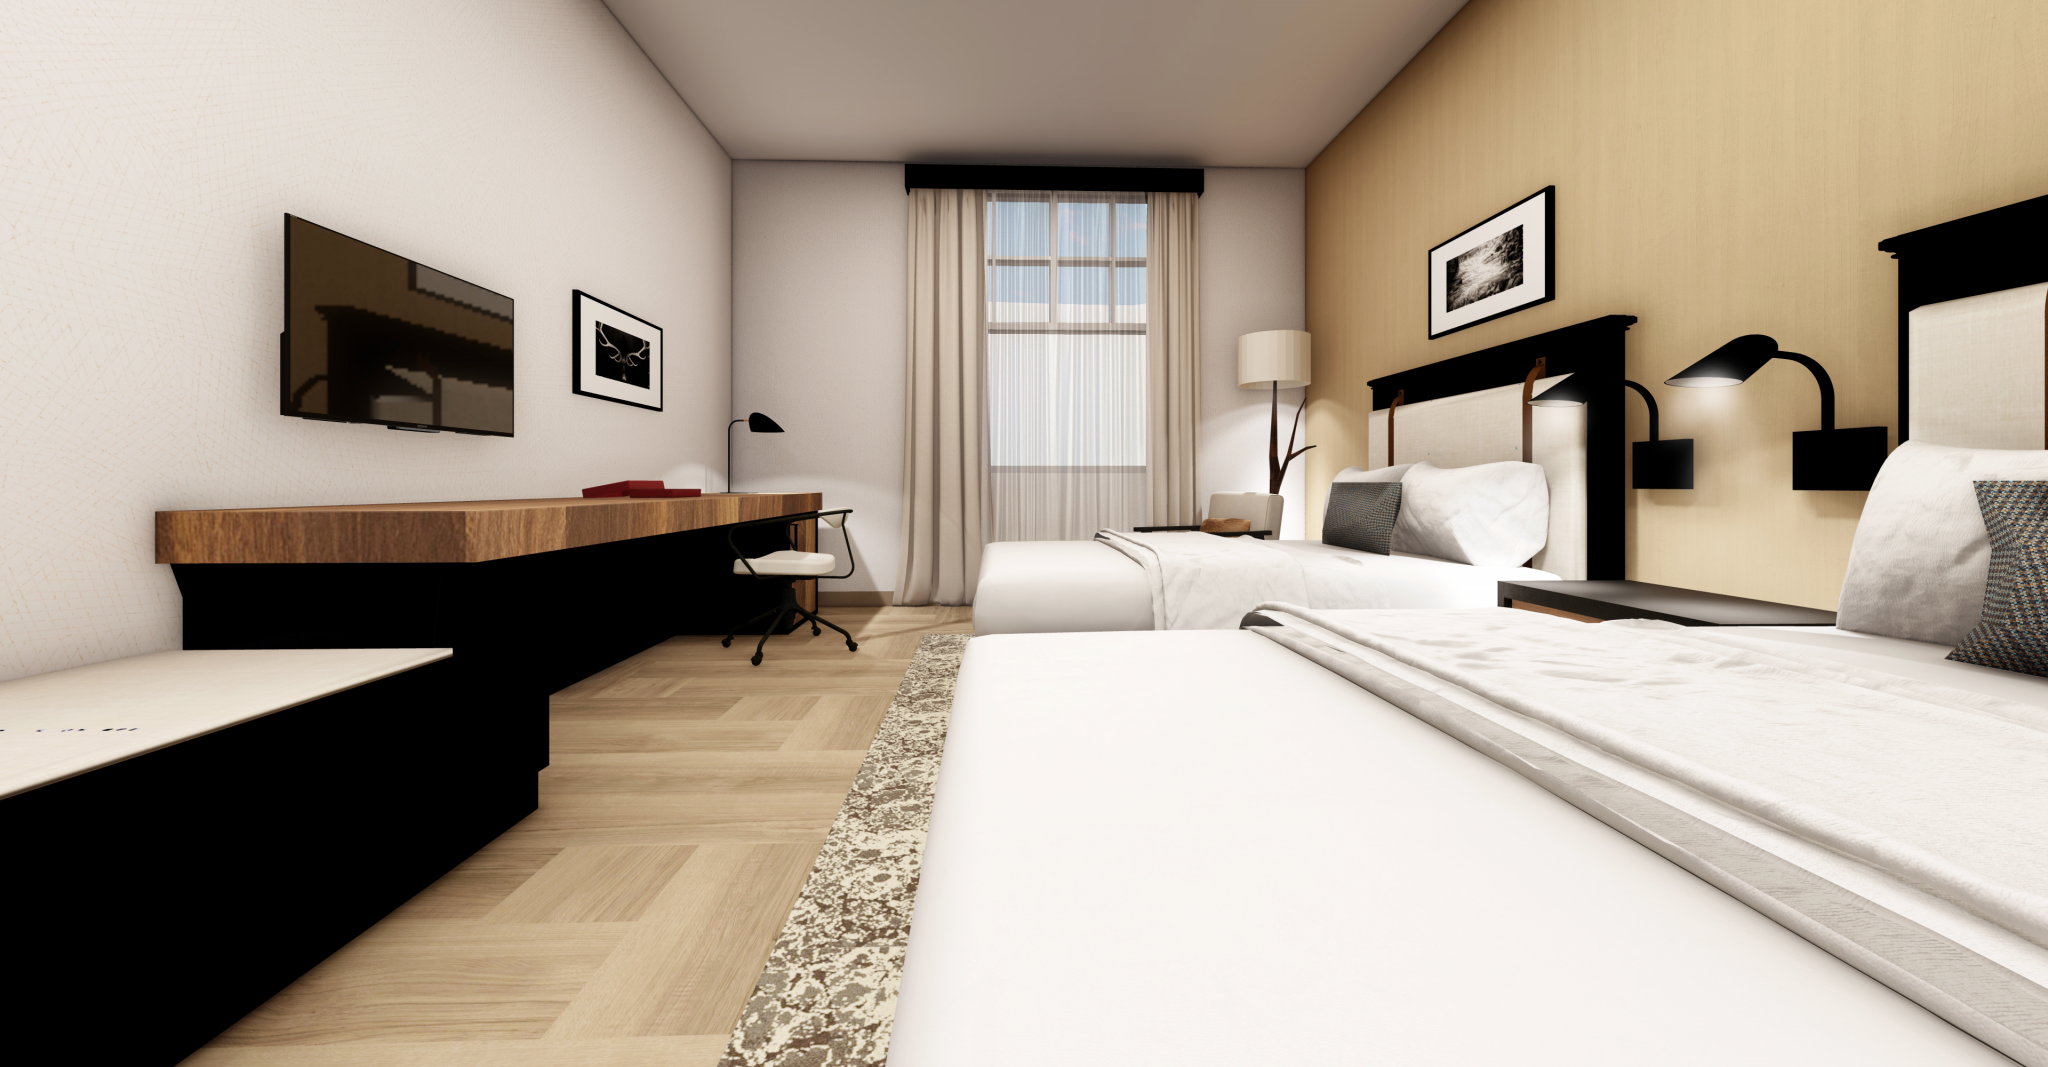 Crisp, modern double queen hotel room with dark wood furniture and warm tone walls.